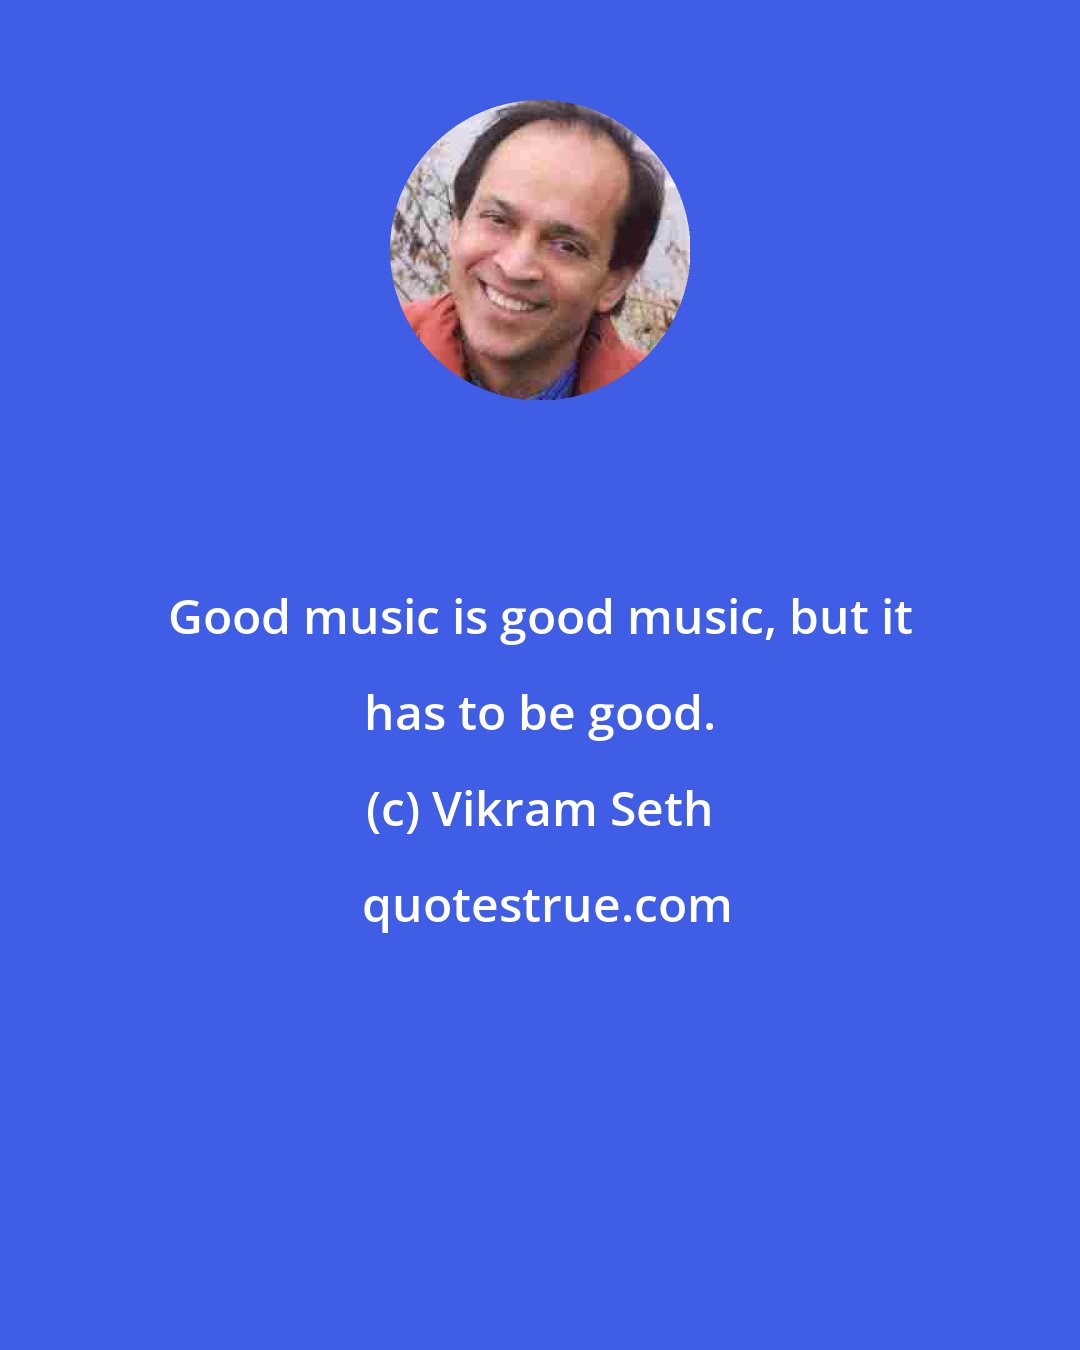 Vikram Seth: Good music is good music, but it has to be good.